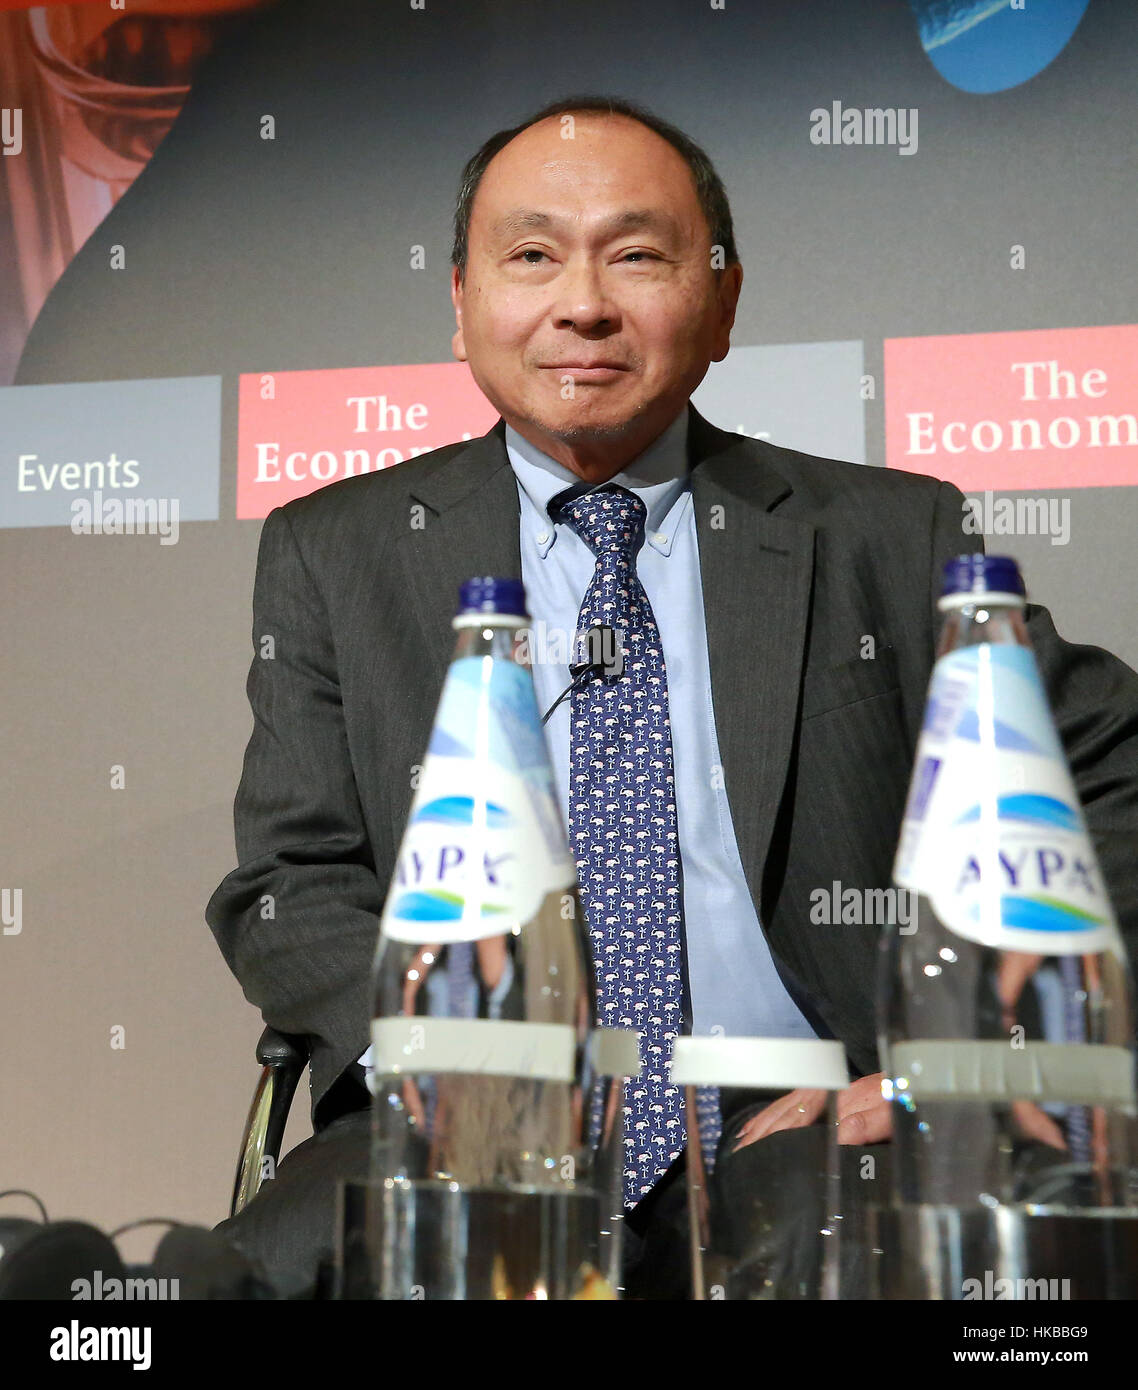 Athens, Greece. 27th Jan, 2017. American political scientist, political economist and author, Francis Fukuyama takes part in a debate on titled 'America and Europe in the World' organized by the 'Economist' in Athens, Greece. Credit: Elias Verdi/Alamy Live News Stock Photo